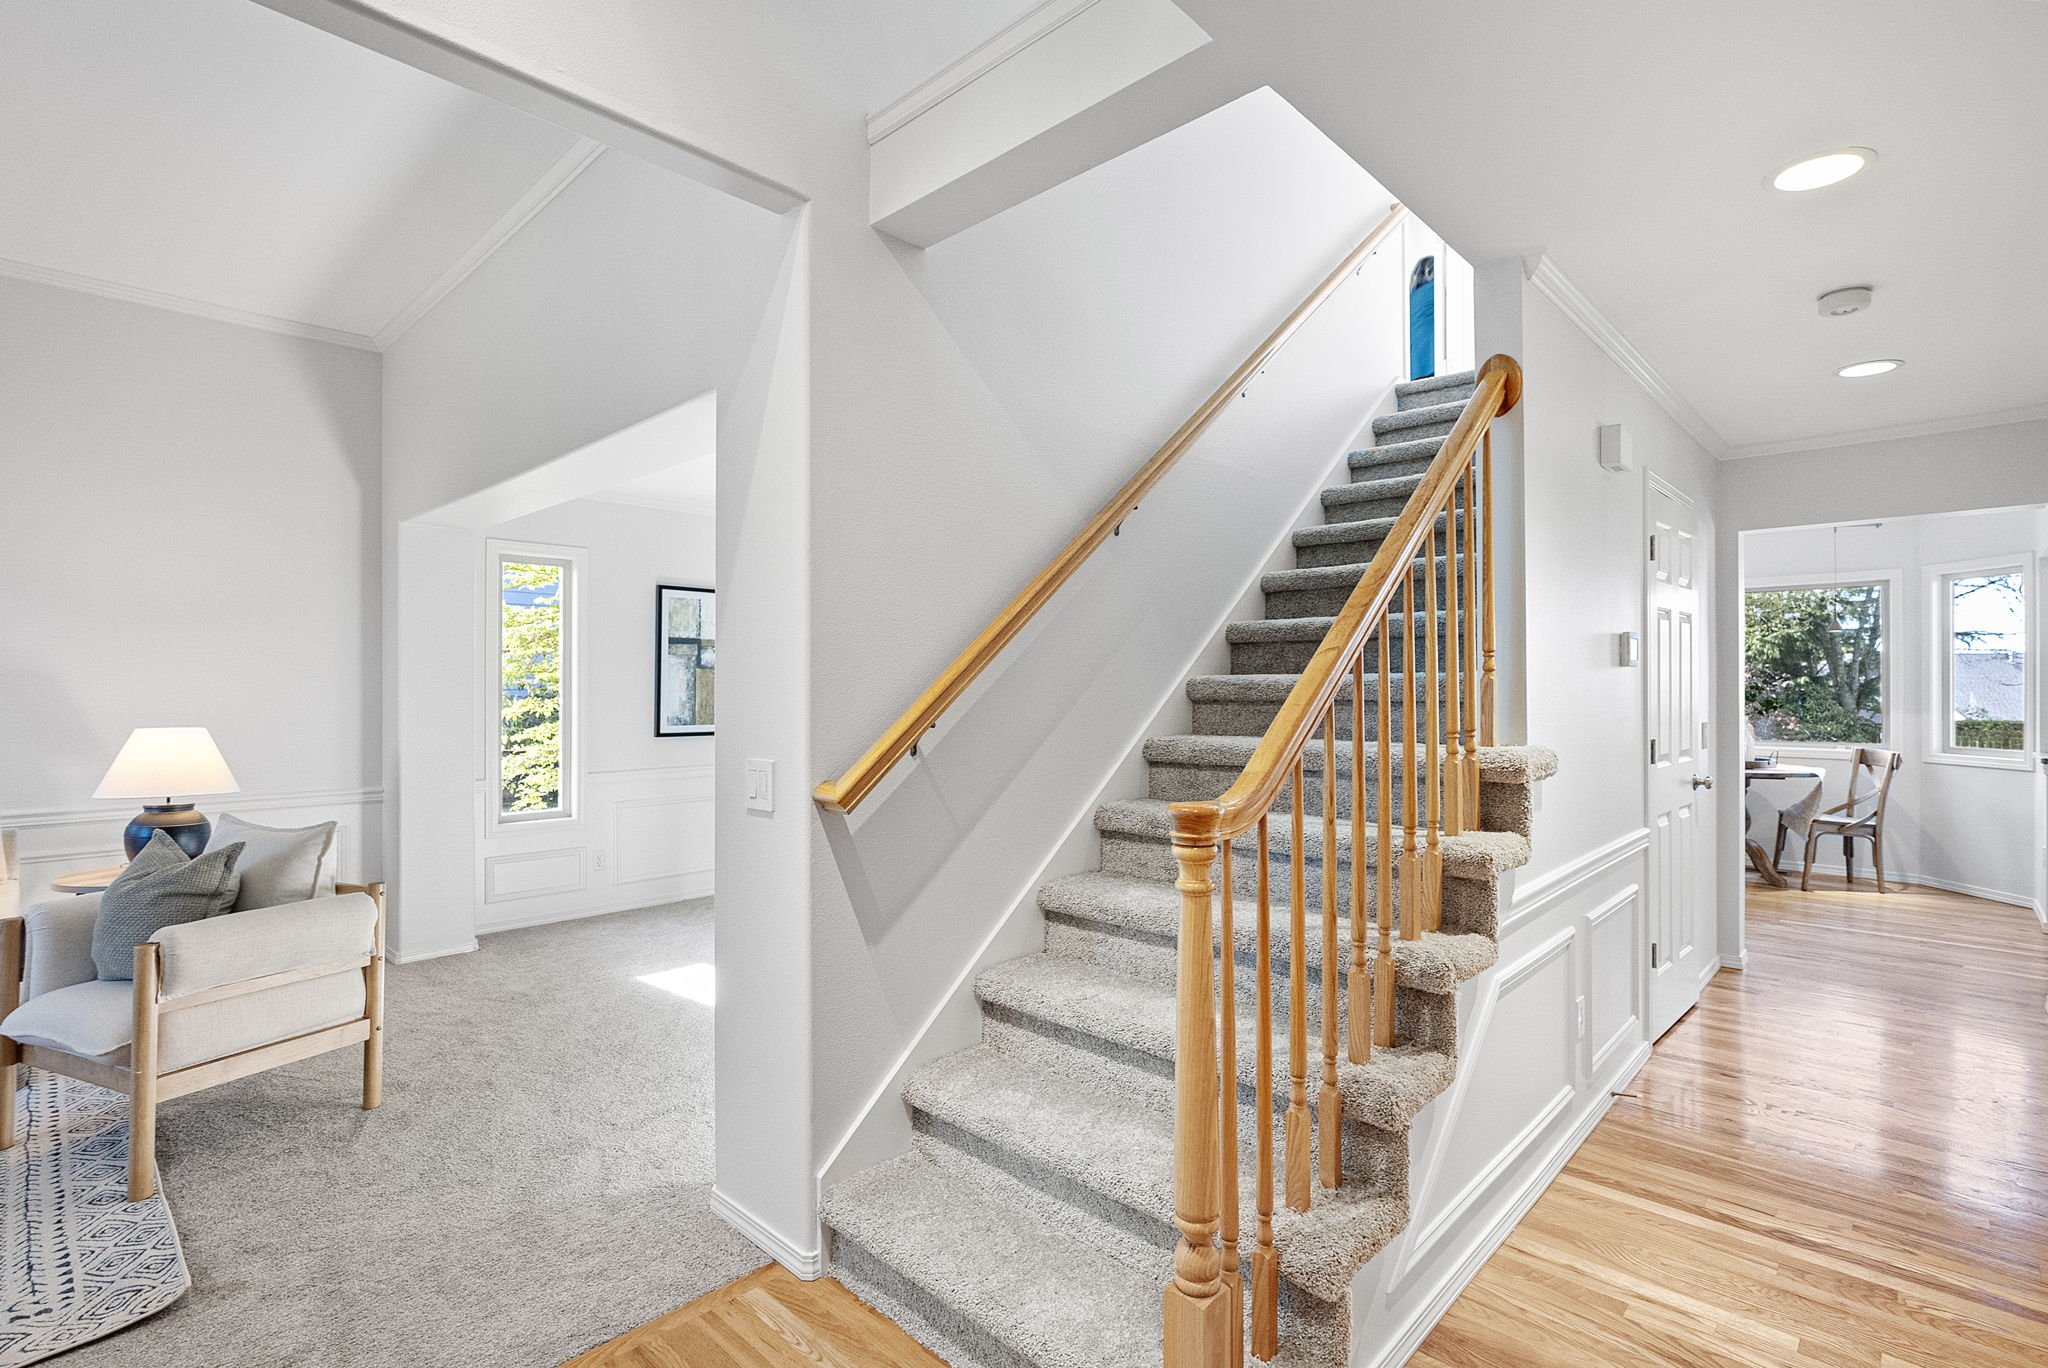 9-web-or-mls-7505-44th-st-ct-nw.jpg